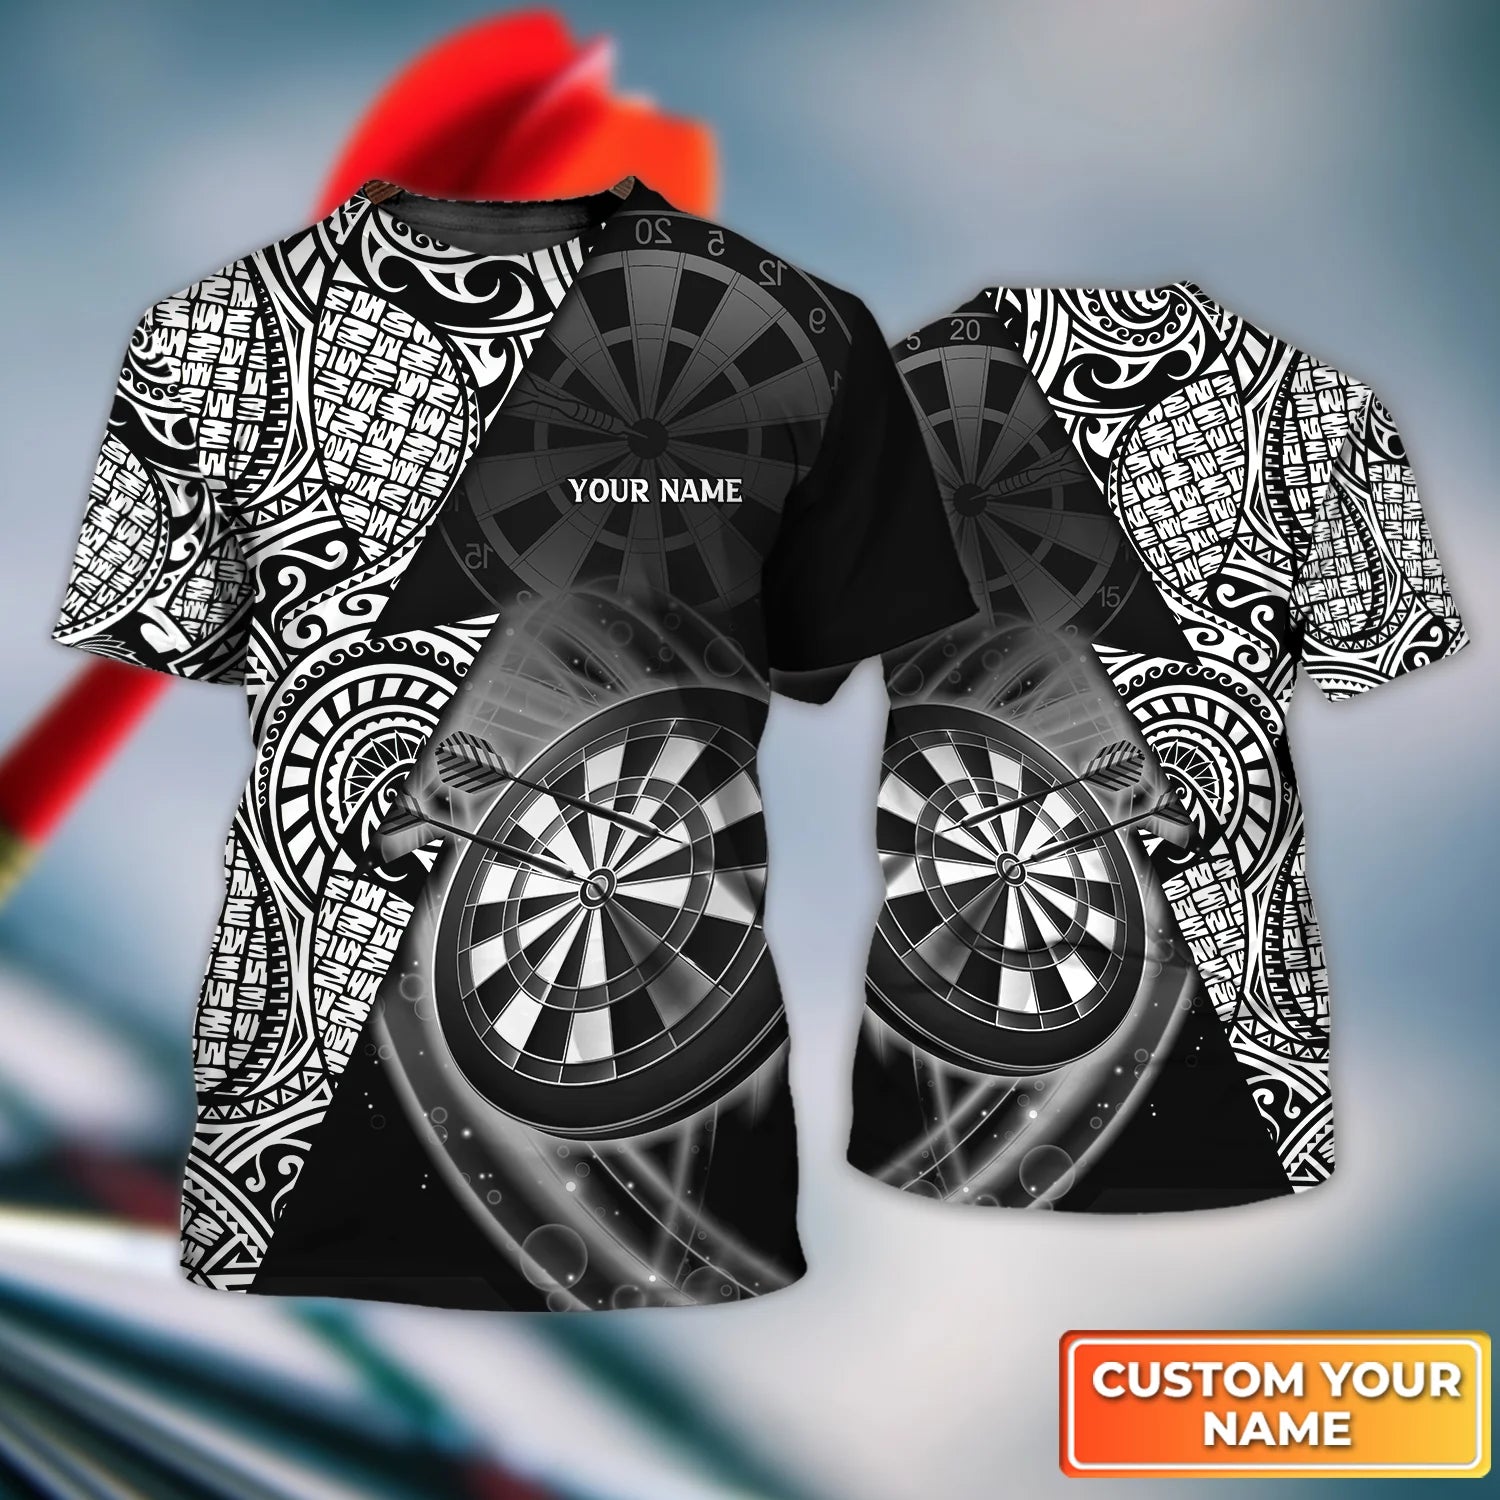 Blue Camo Darts Personalized Name 3D Tshirt For Darts Team Player – DT065